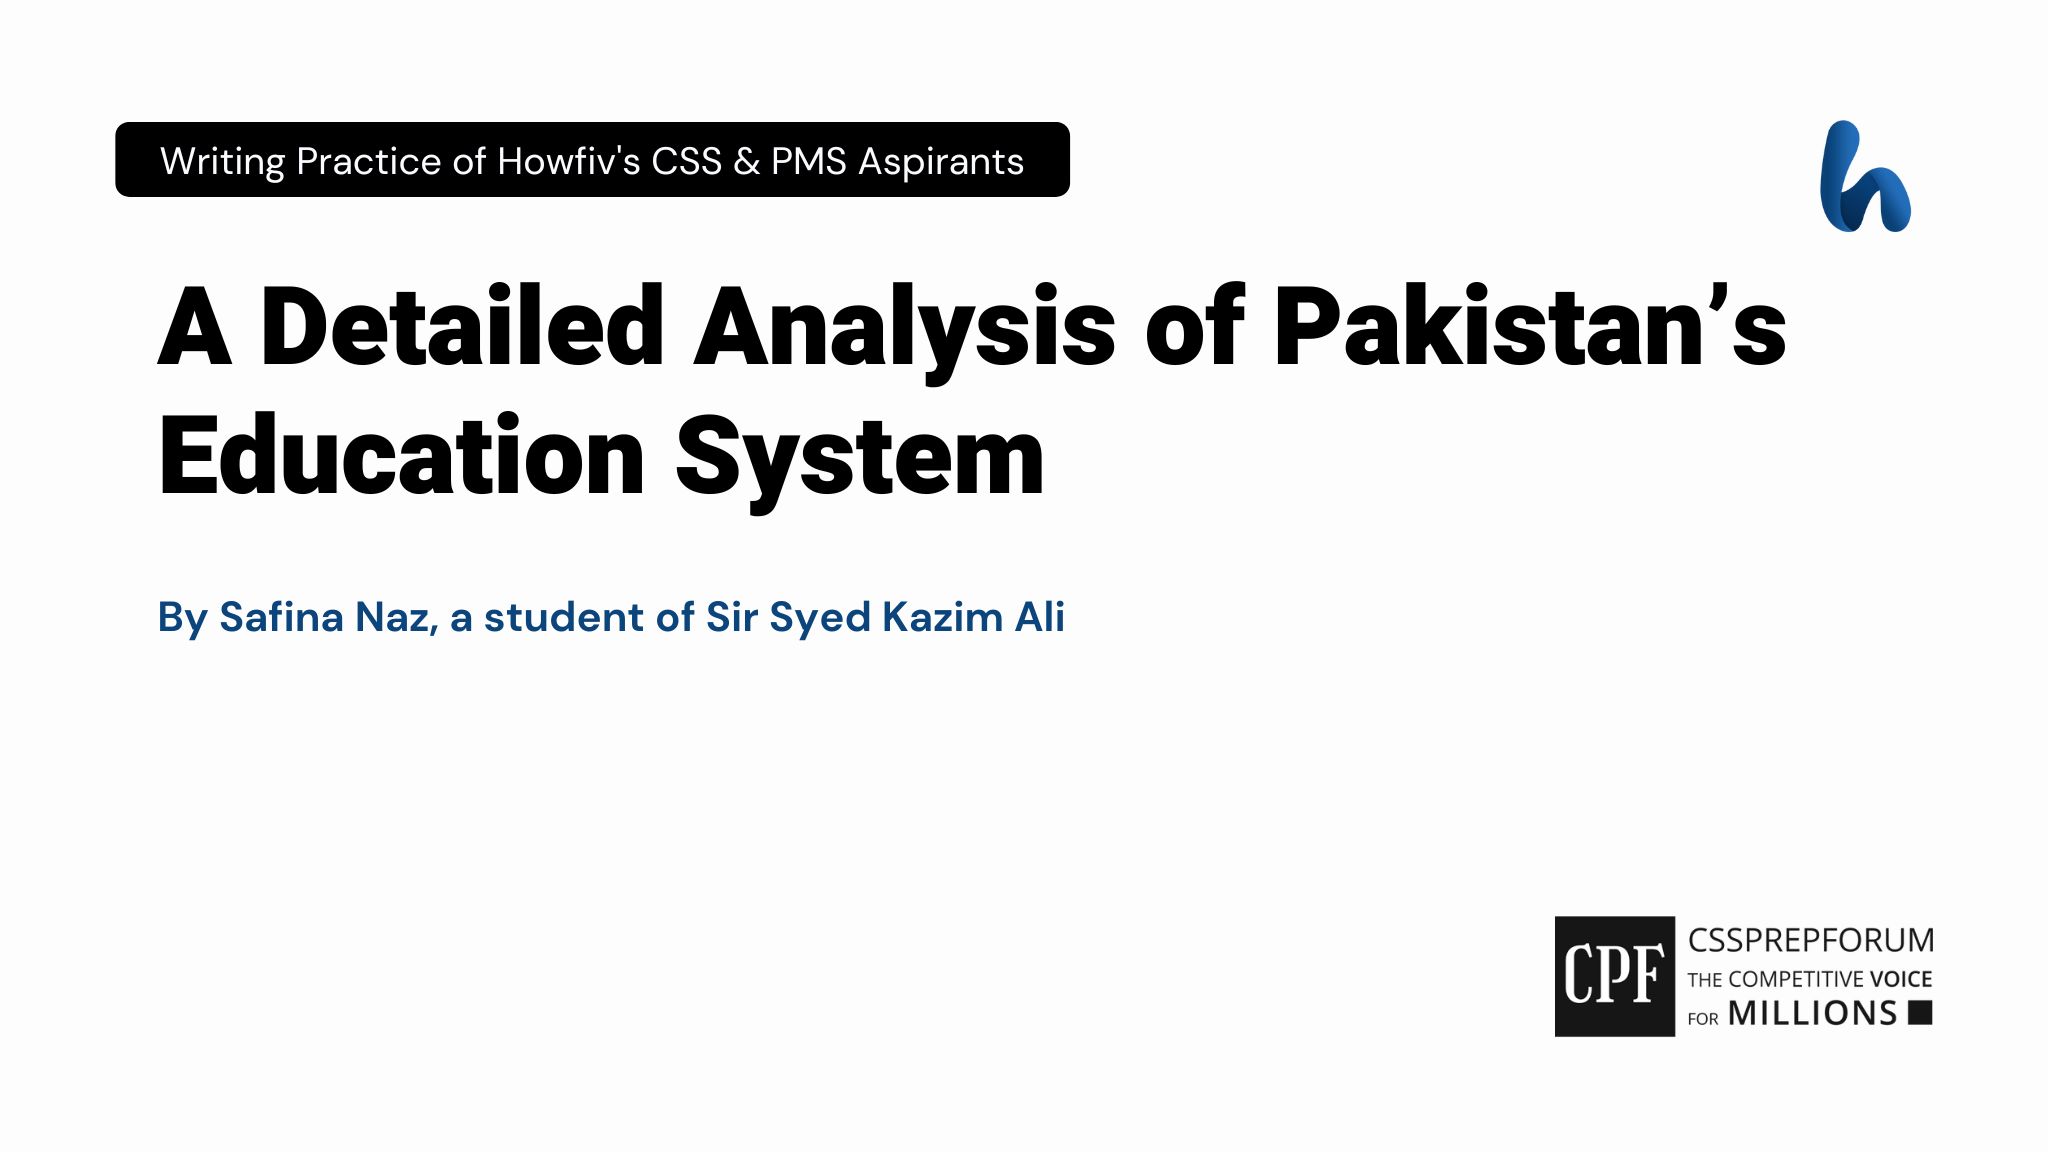 A Detailed Analysis of Pakistan’s Education System by Safina Naz